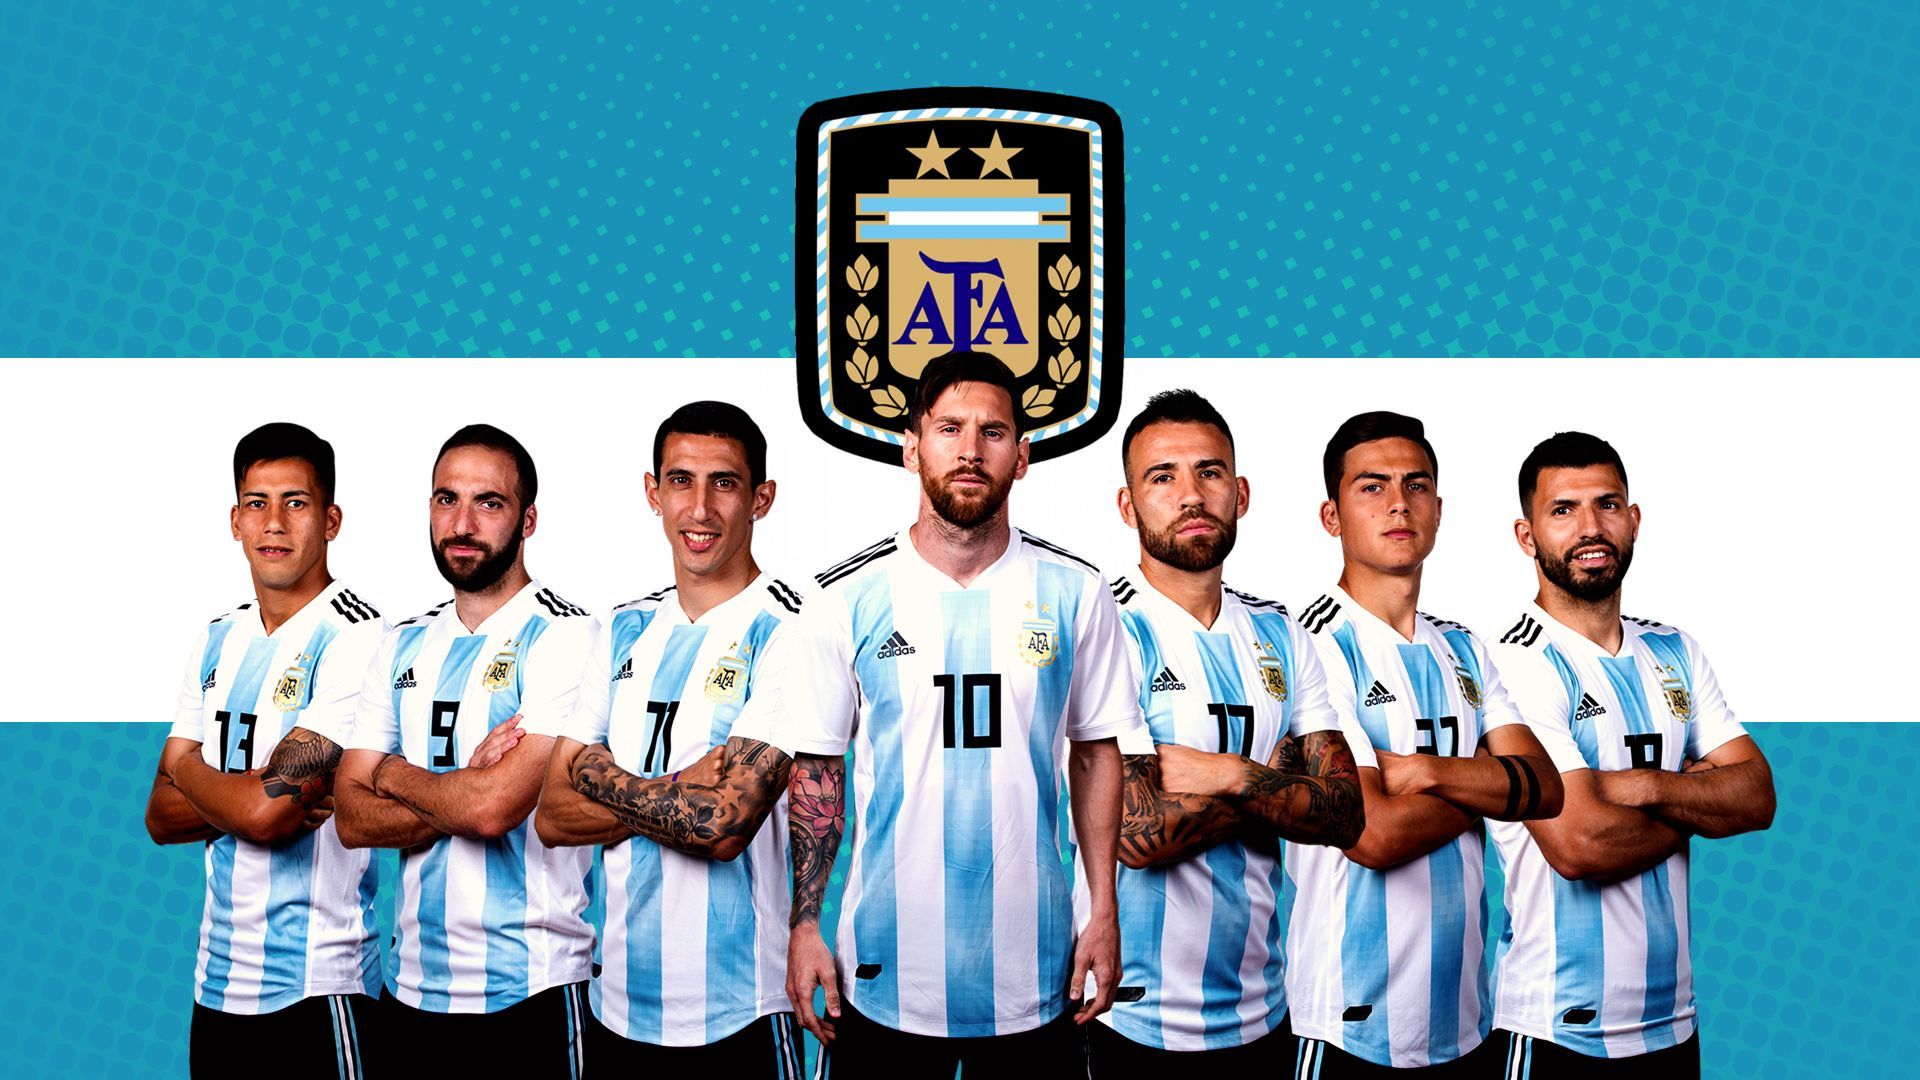 Argentina's mission: Can the dream squad lead to World cup glory